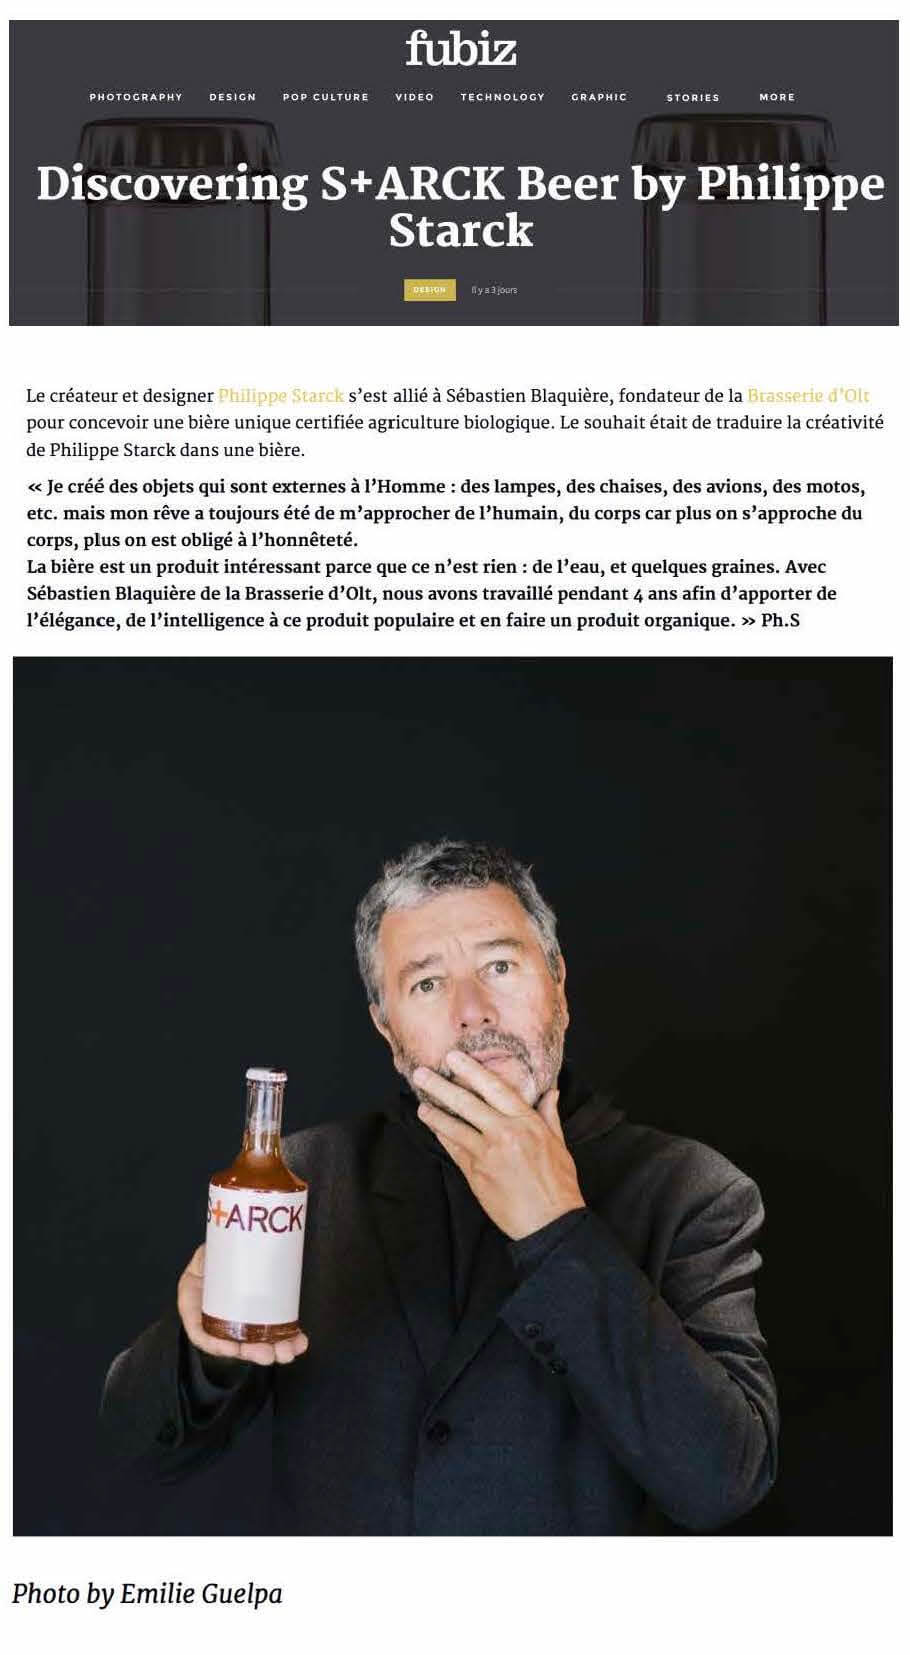 Discovering S+ARCK Beer by Philippe Starck